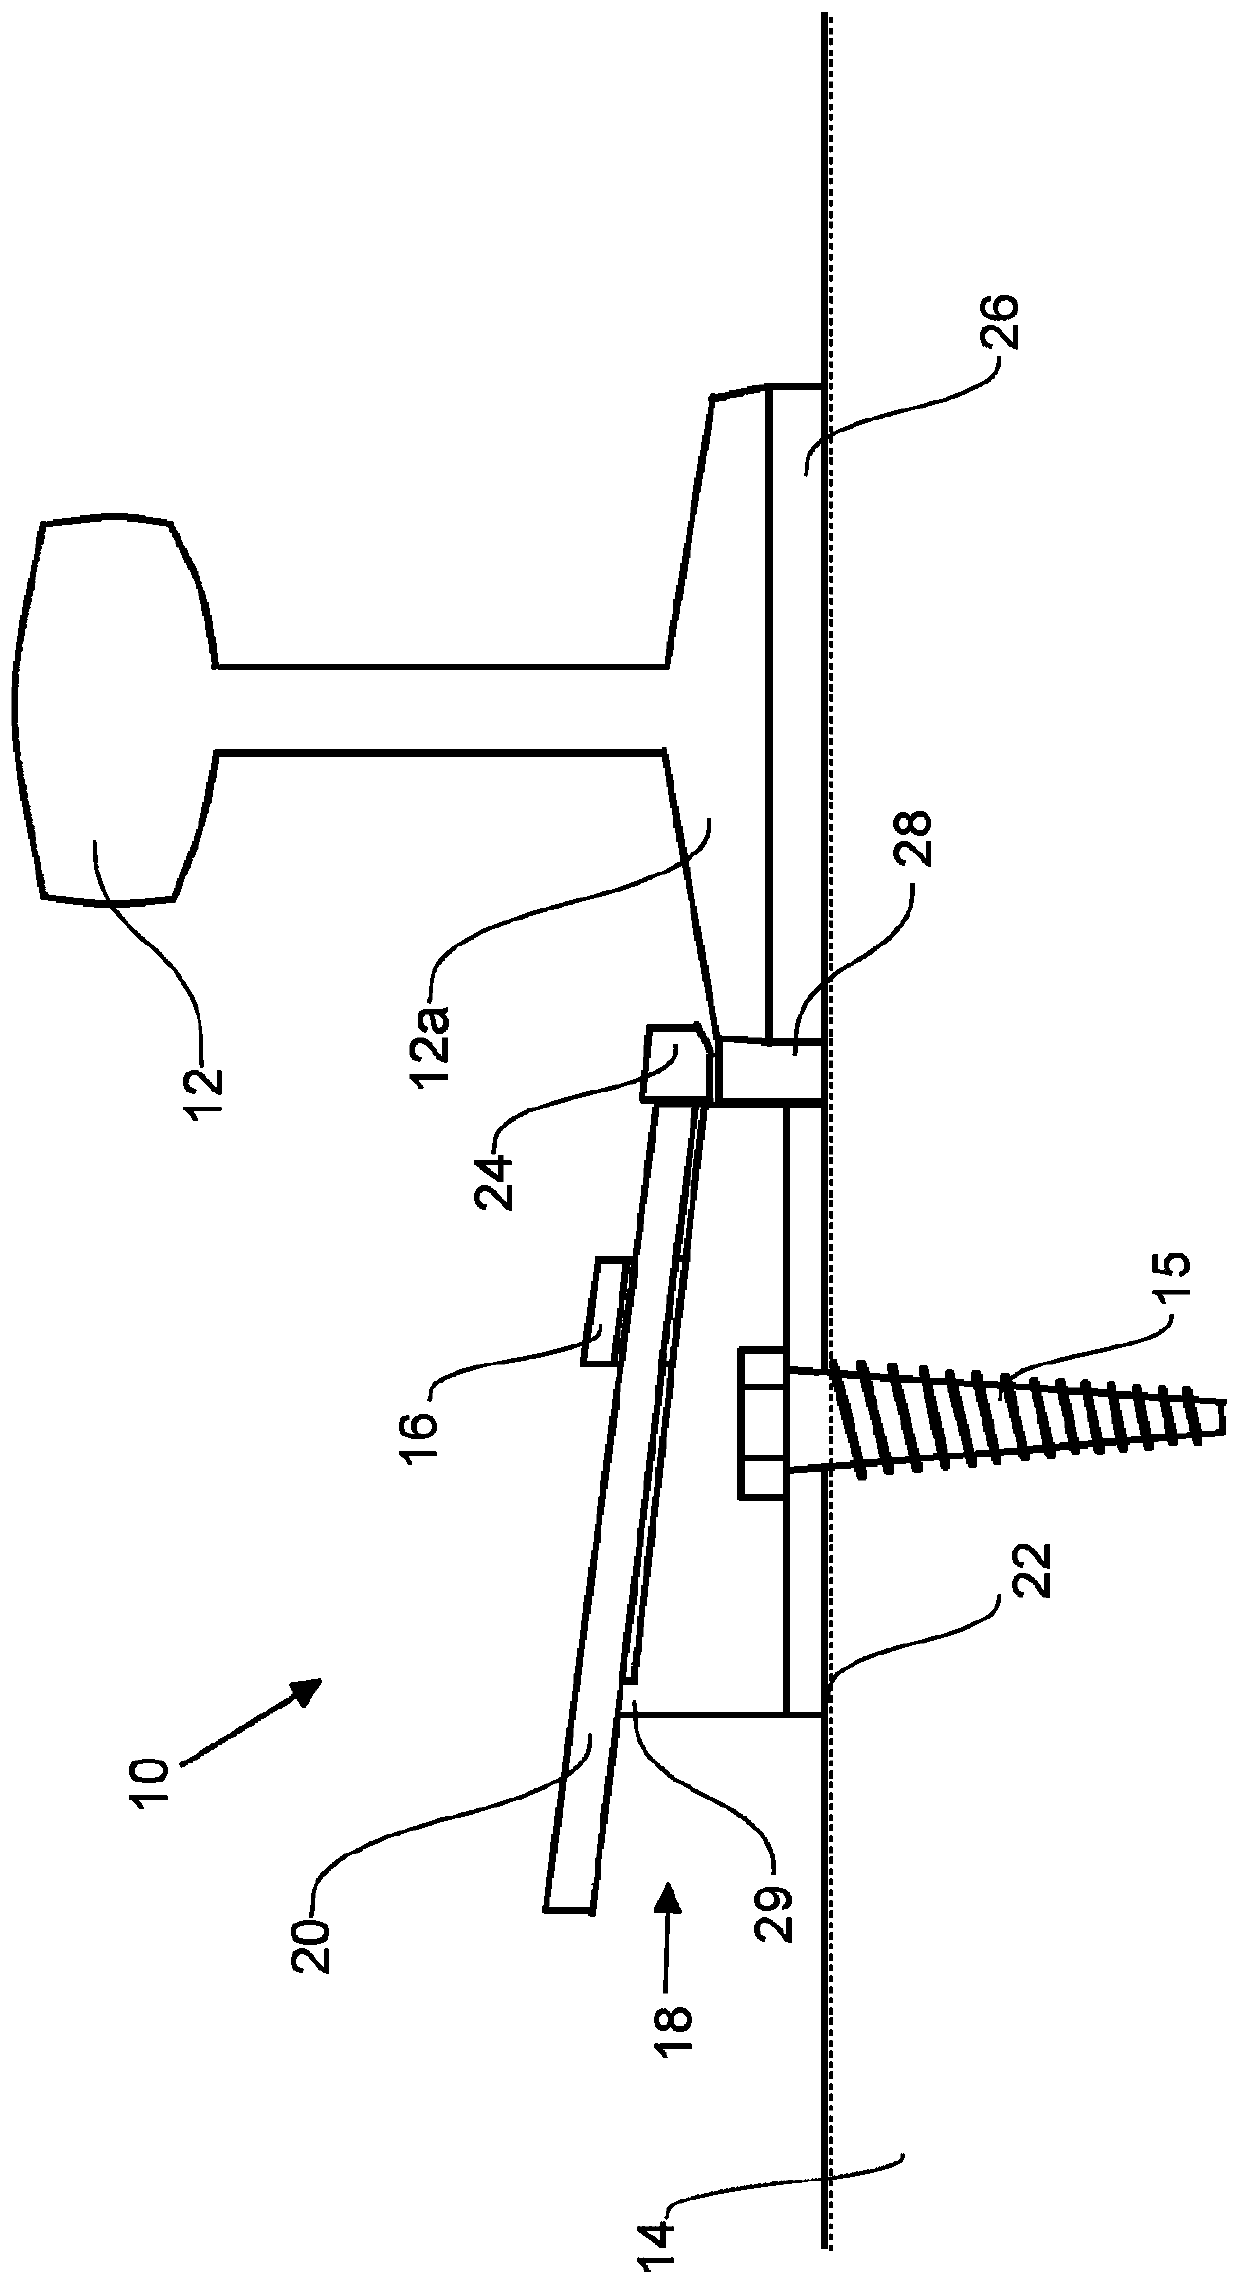 Rail mounting device and method for fixing rails to reinforced concrete railway sleeper